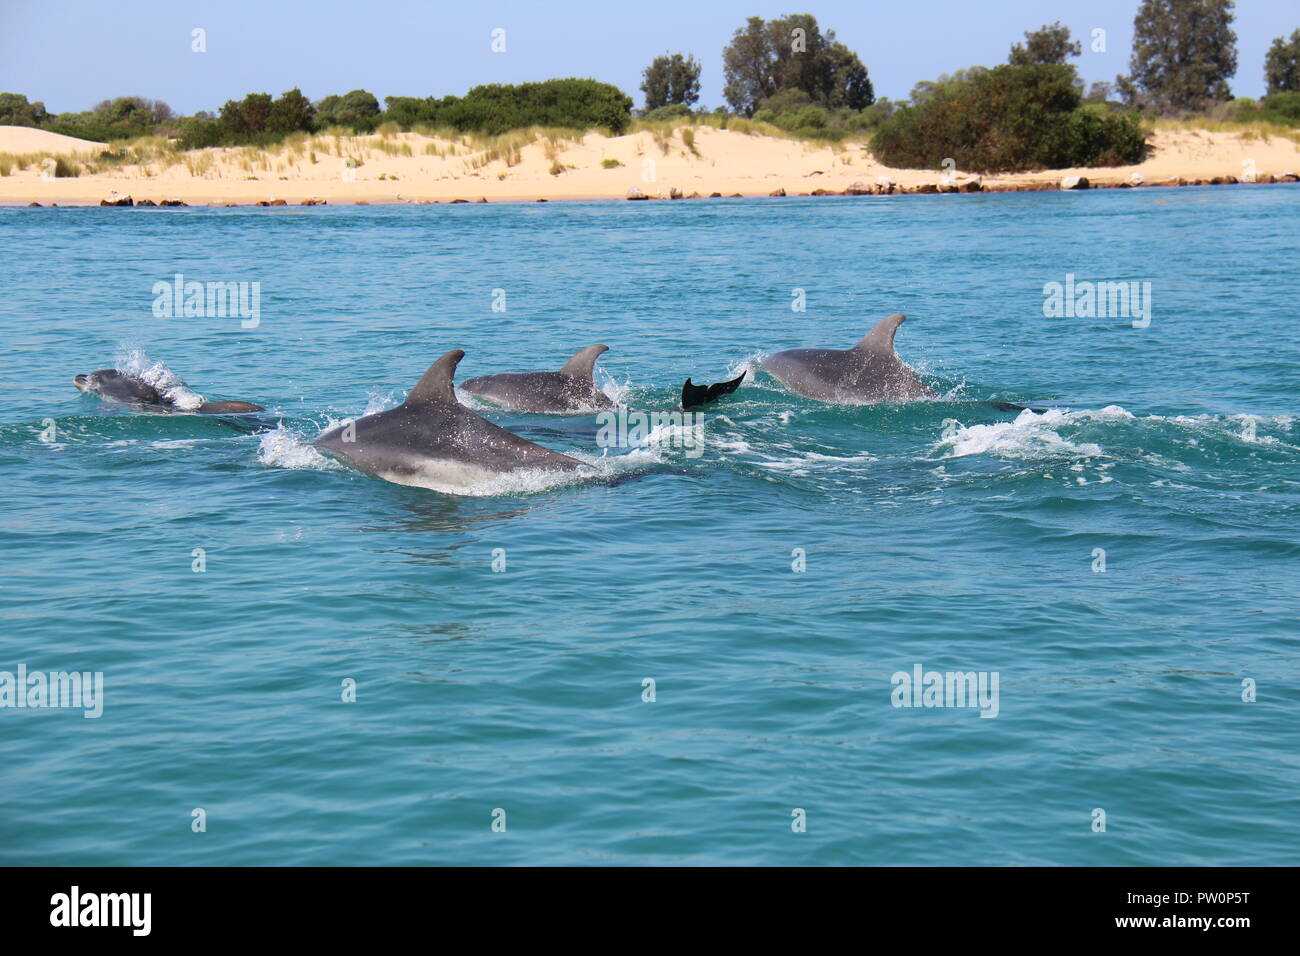 Graceful dolphins jumping next to boat. Stock Photo